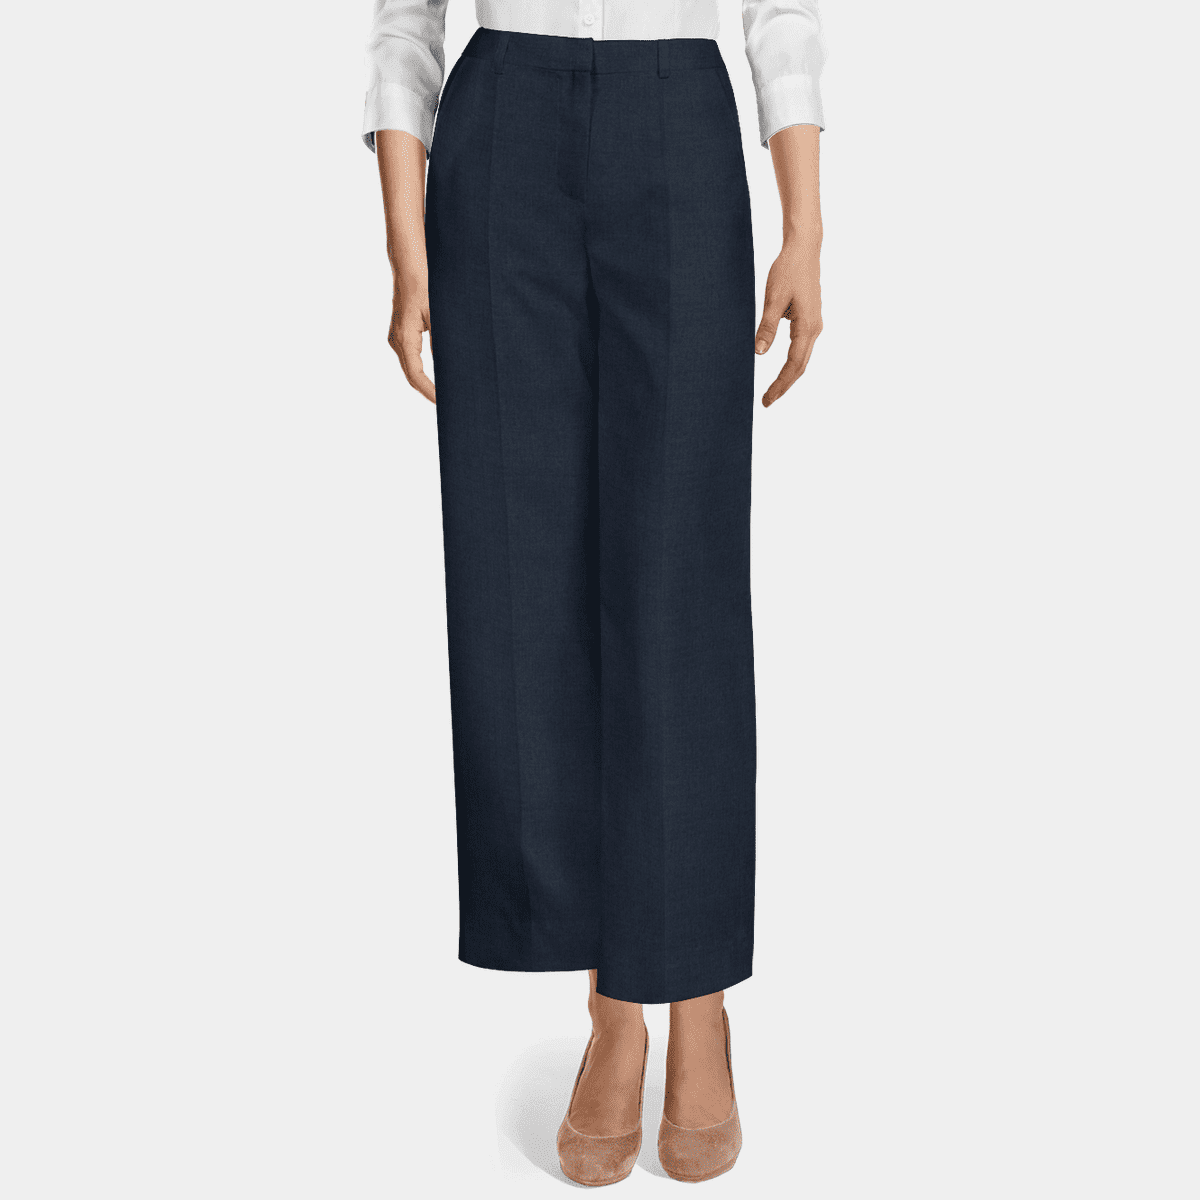 Karuedoo Women's High Waist Flared Work Pants Straight-Leg Front Slit  Cropped Trousers with Pockets Navy Blue M 